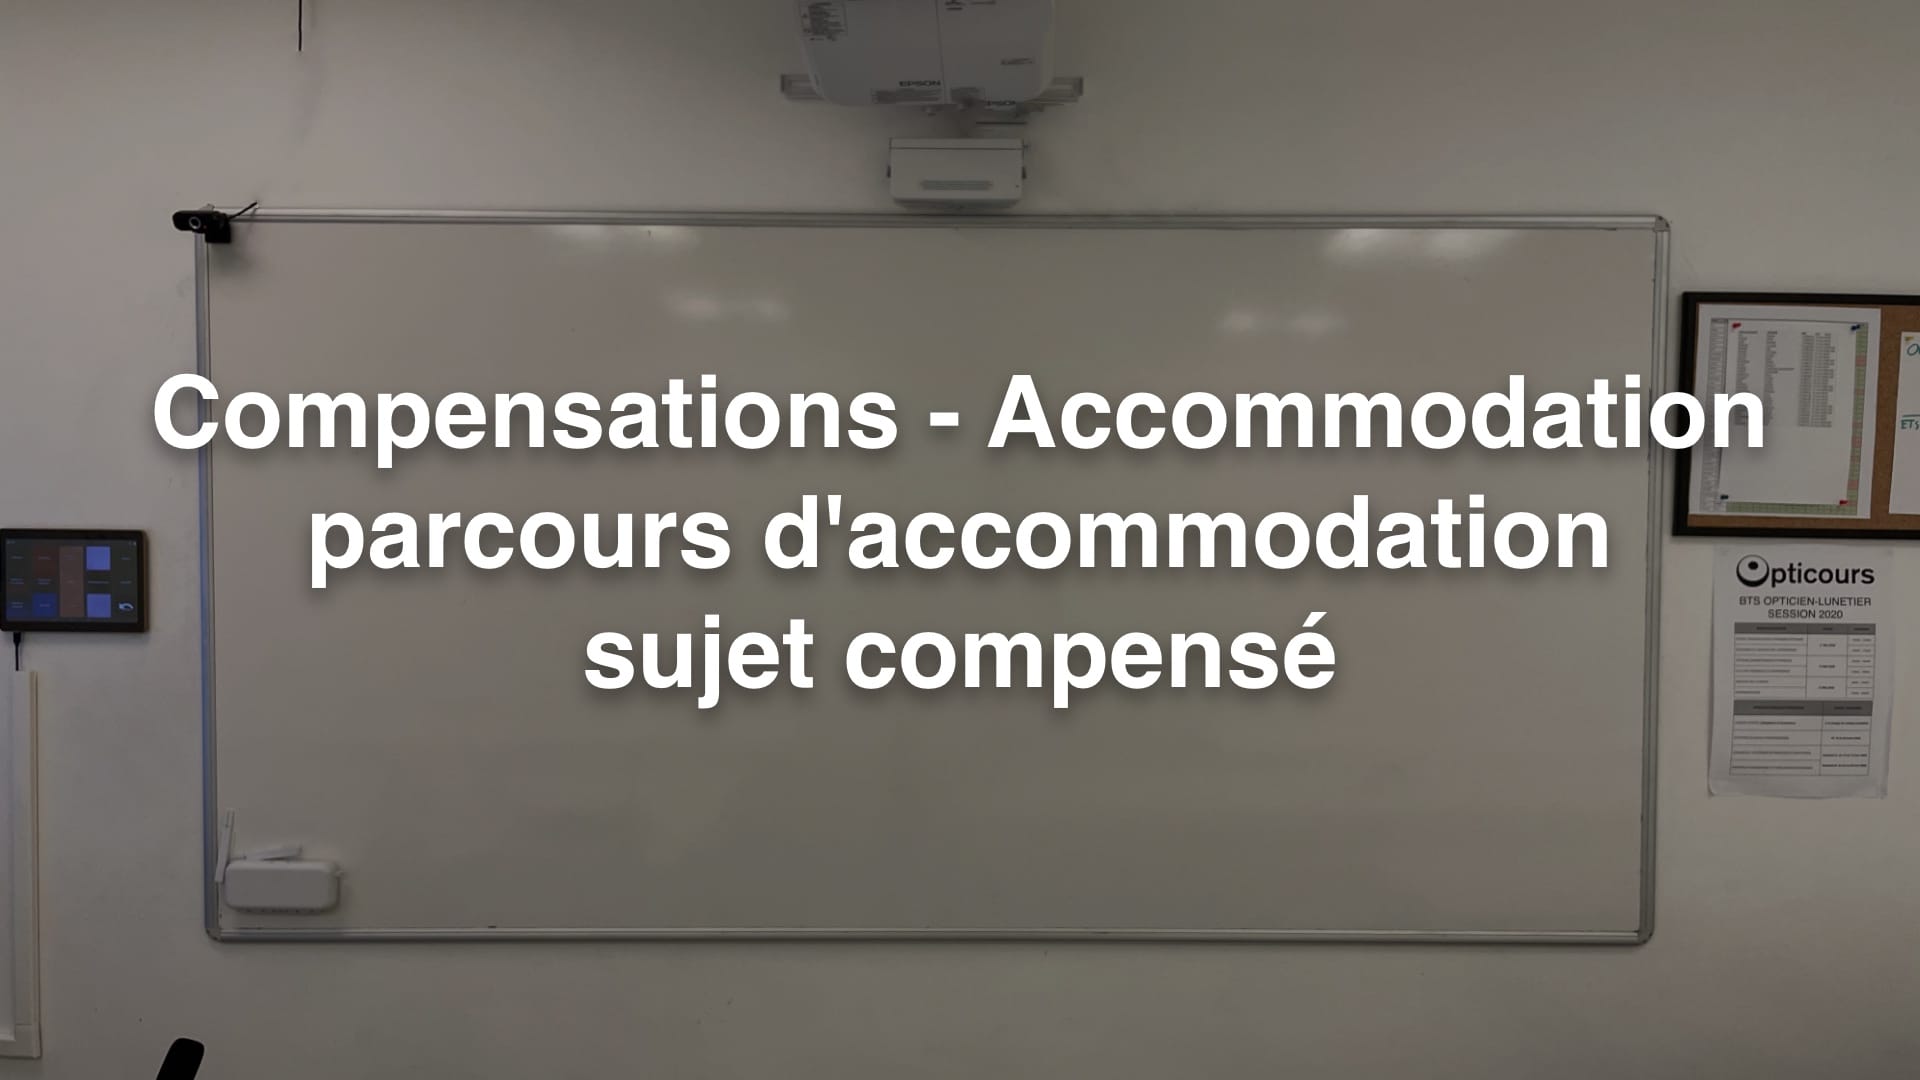 Cours BTS OL Accommodation